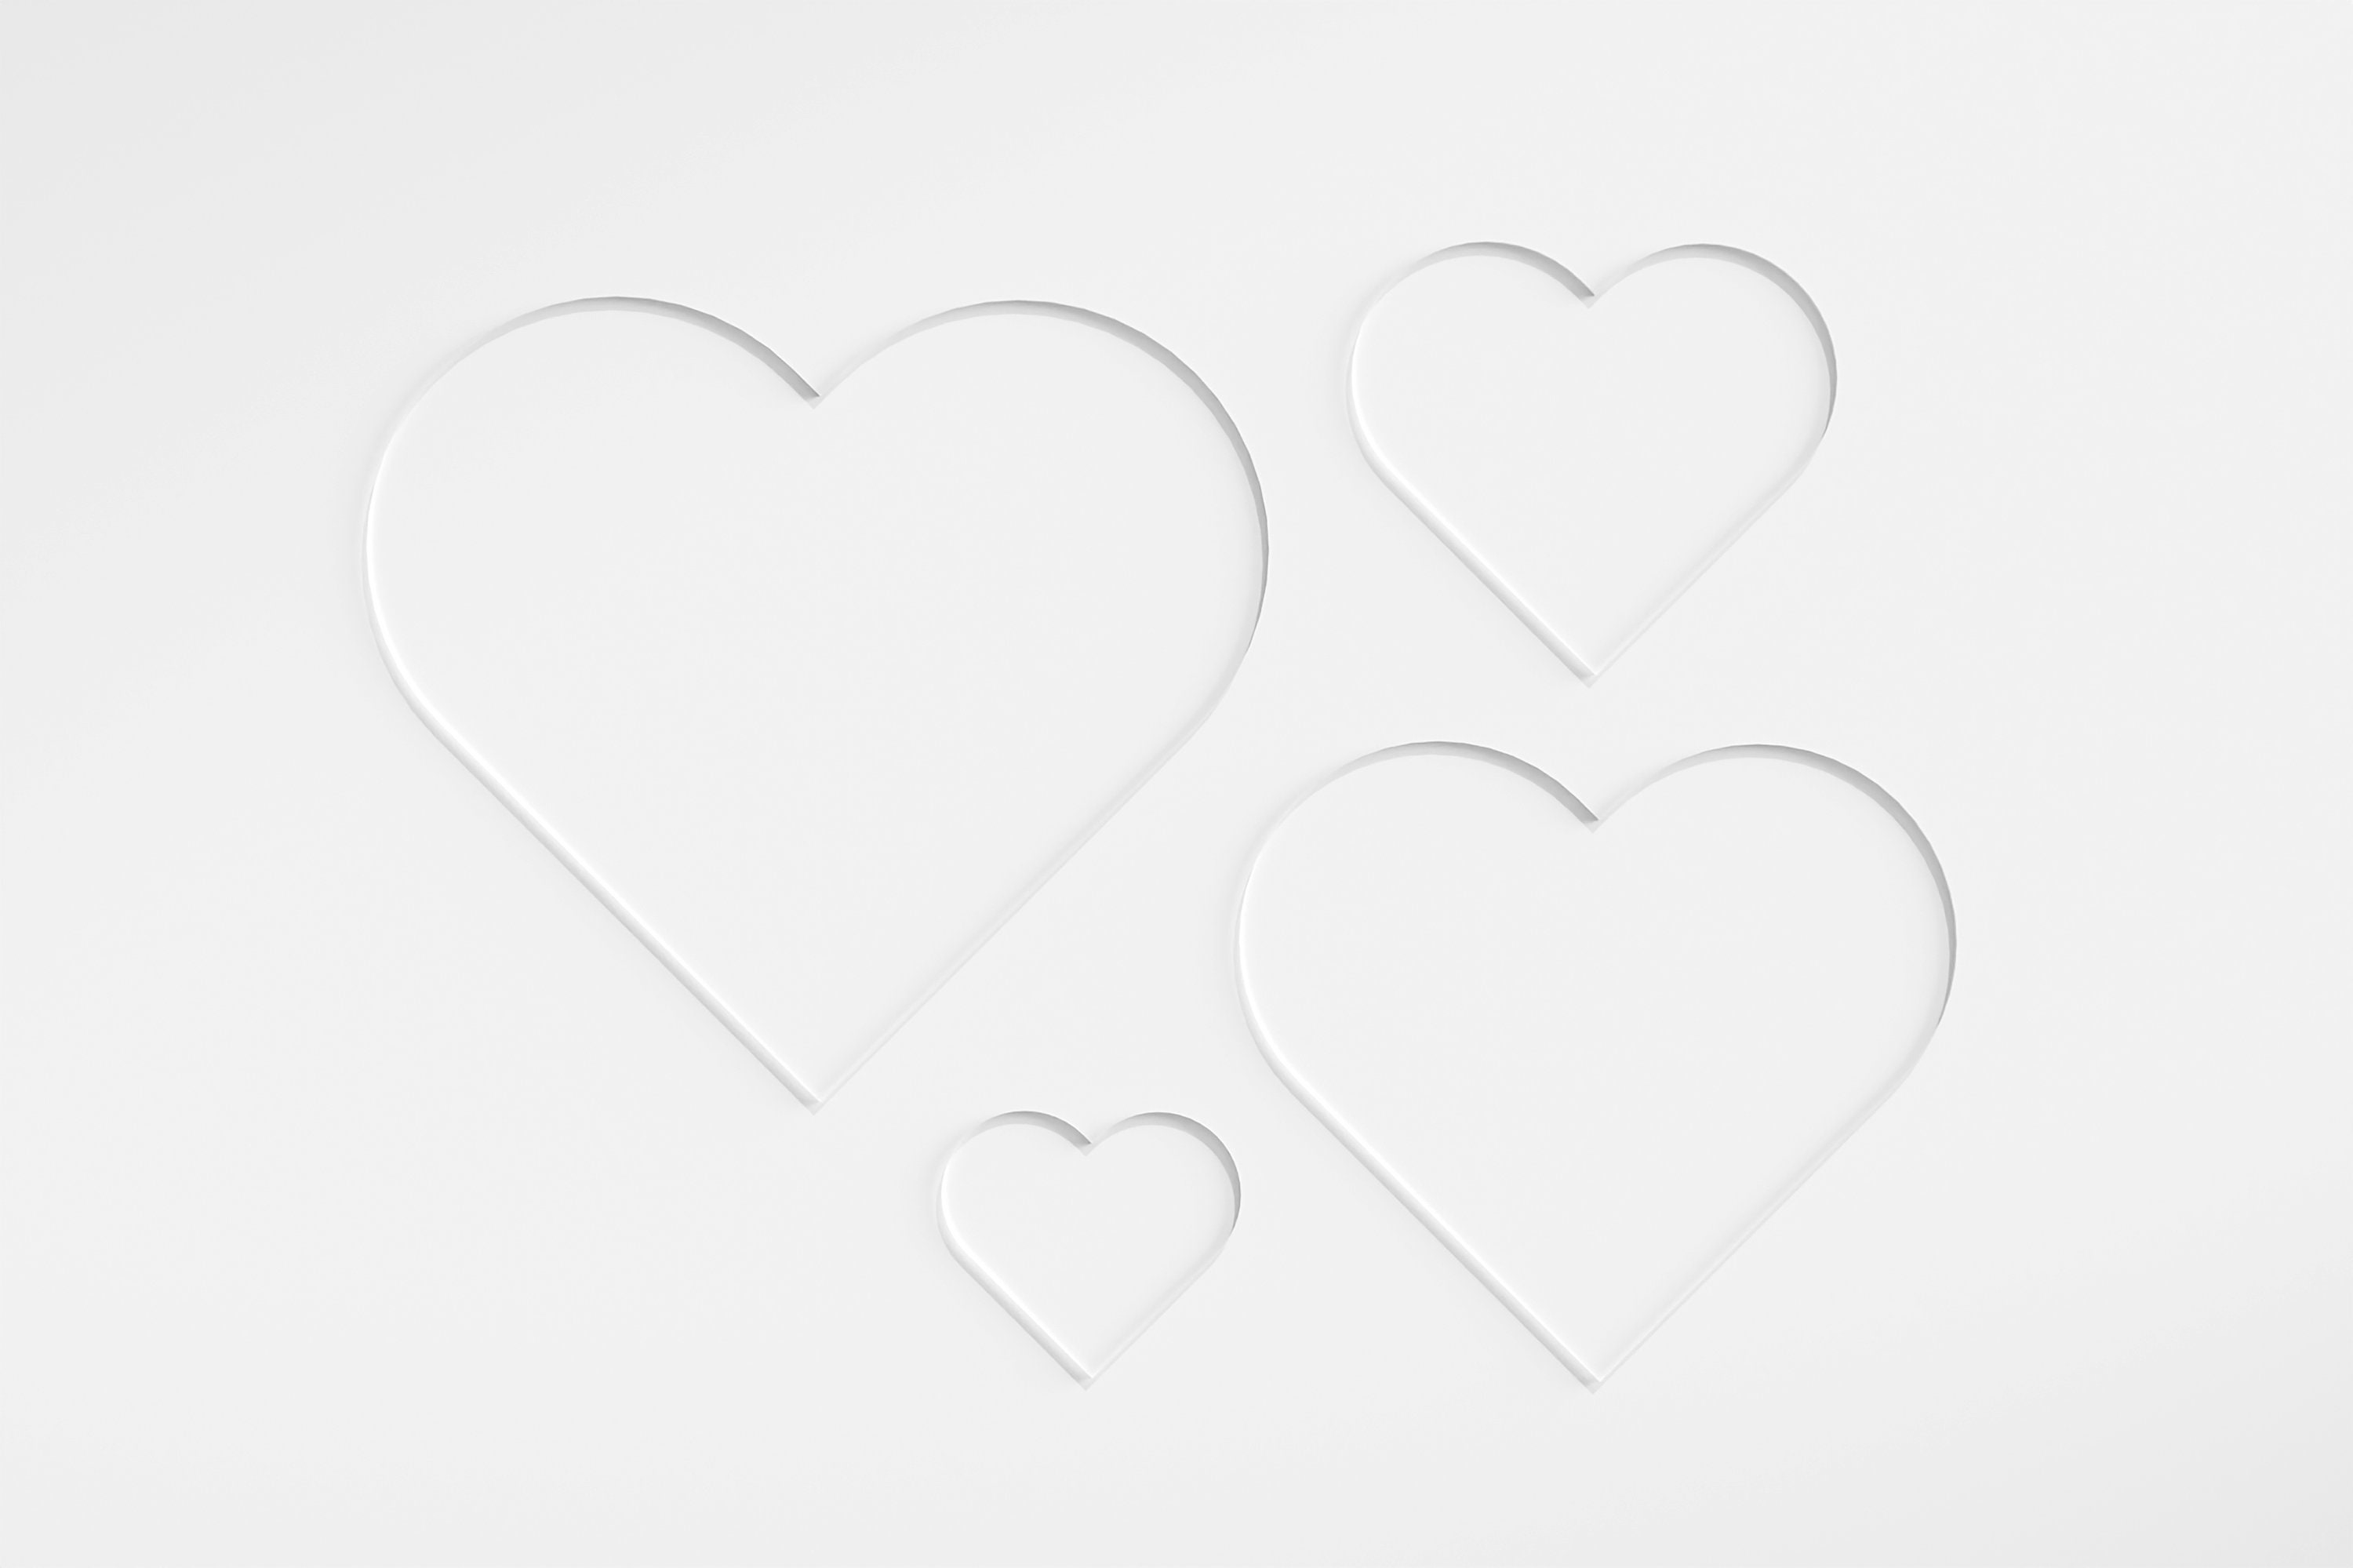 Clear Heart Shape Acrylic Blanks For Diy Wedding Kits & Crafts. Available in Large, Small Custom Sizes